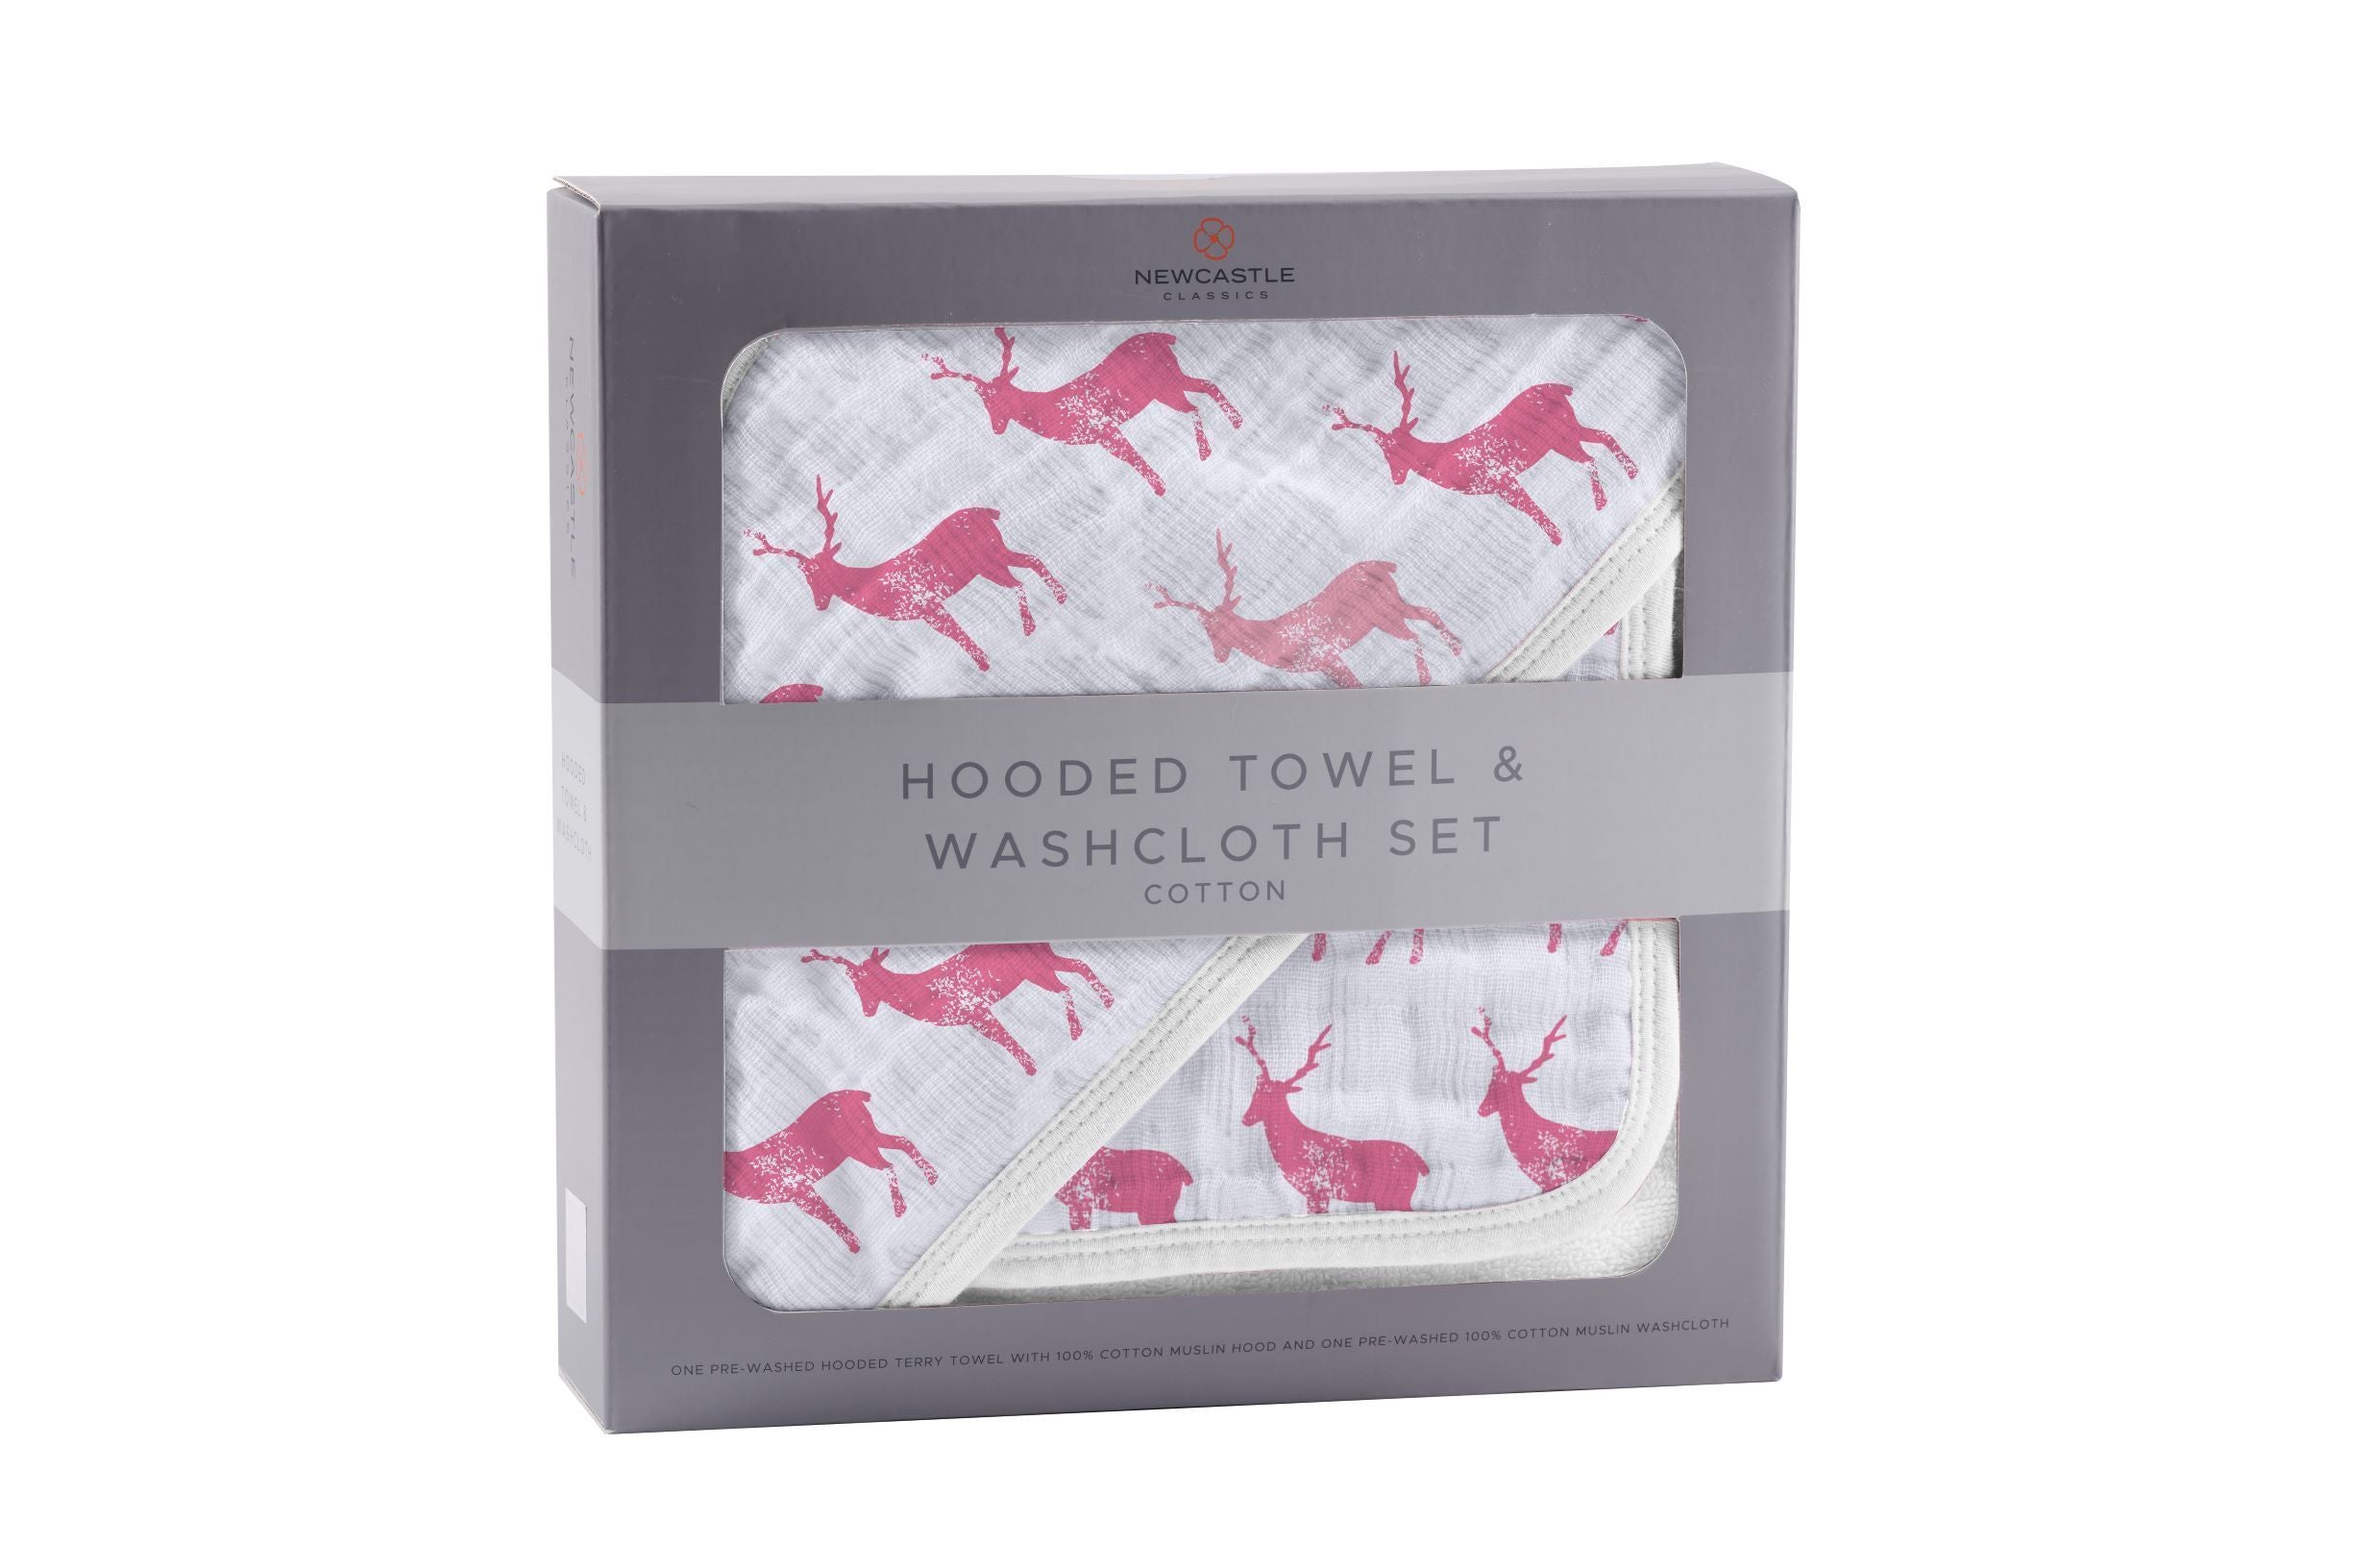 Pink Deer Cotton Hooded Towel and Washcloth Set Newcastle